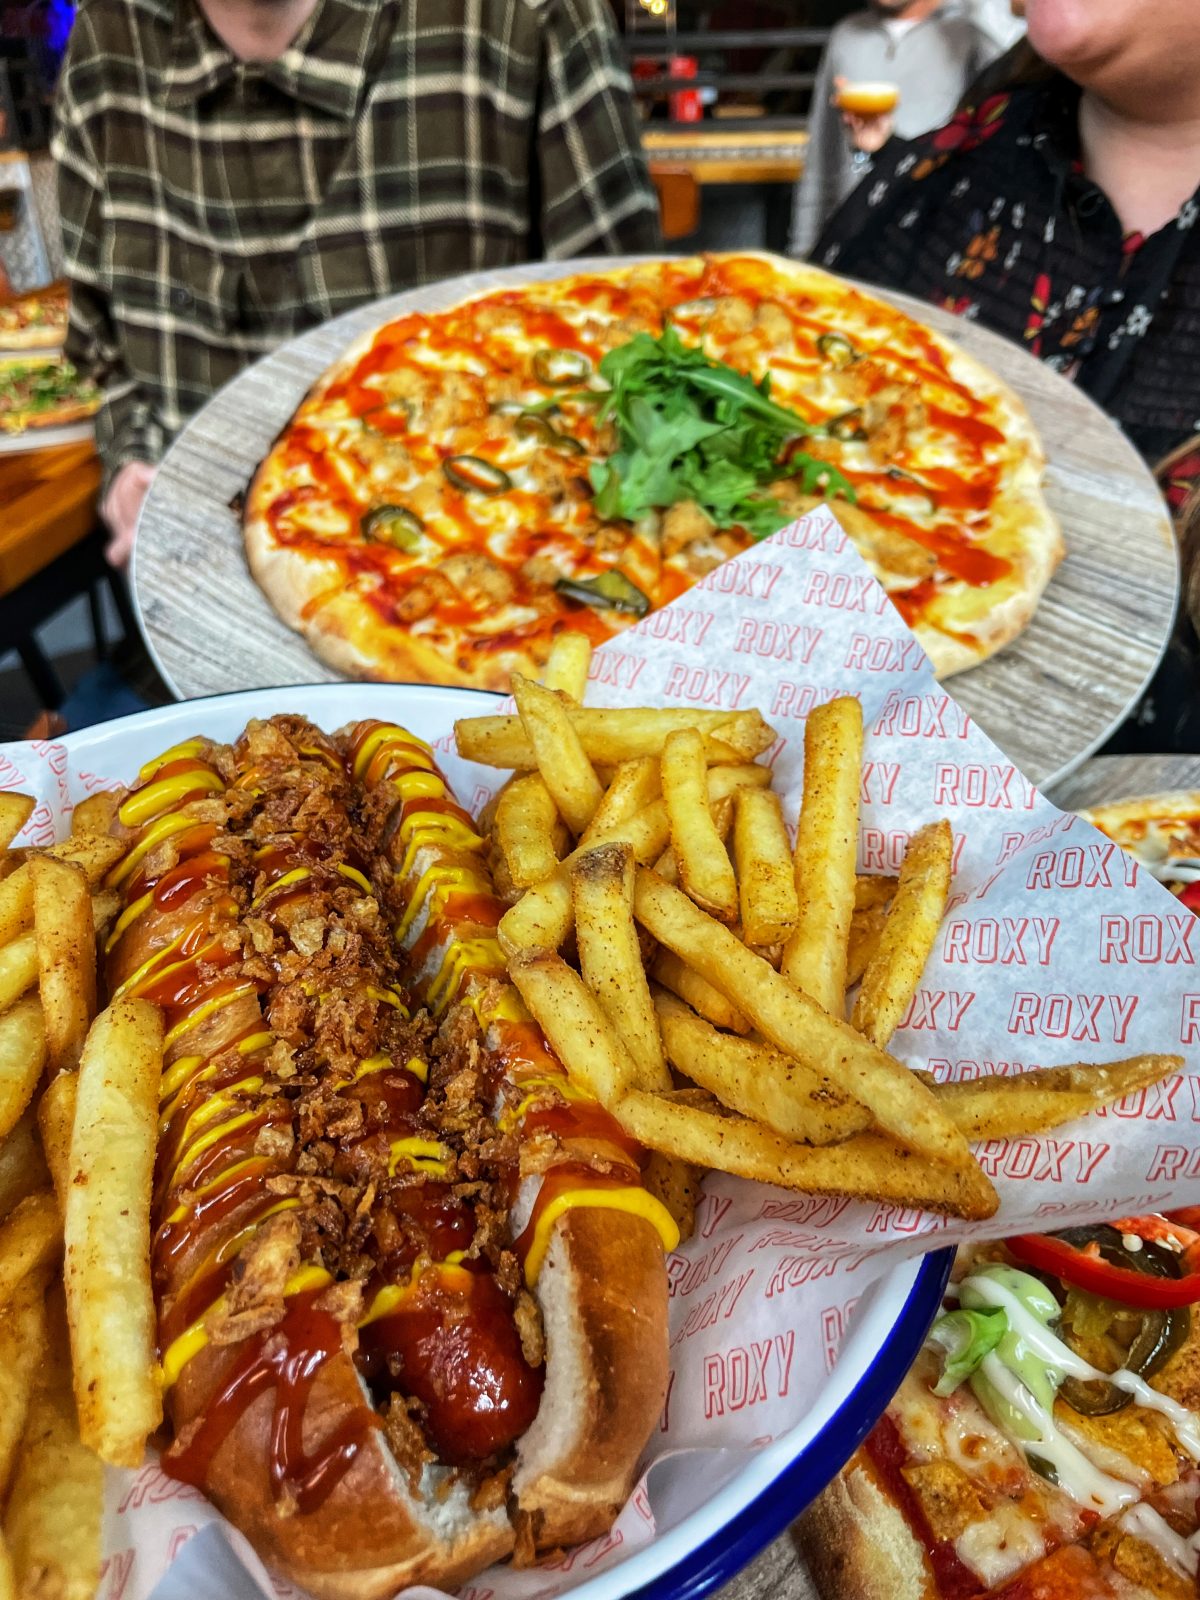 pizza, hot dog and fries.